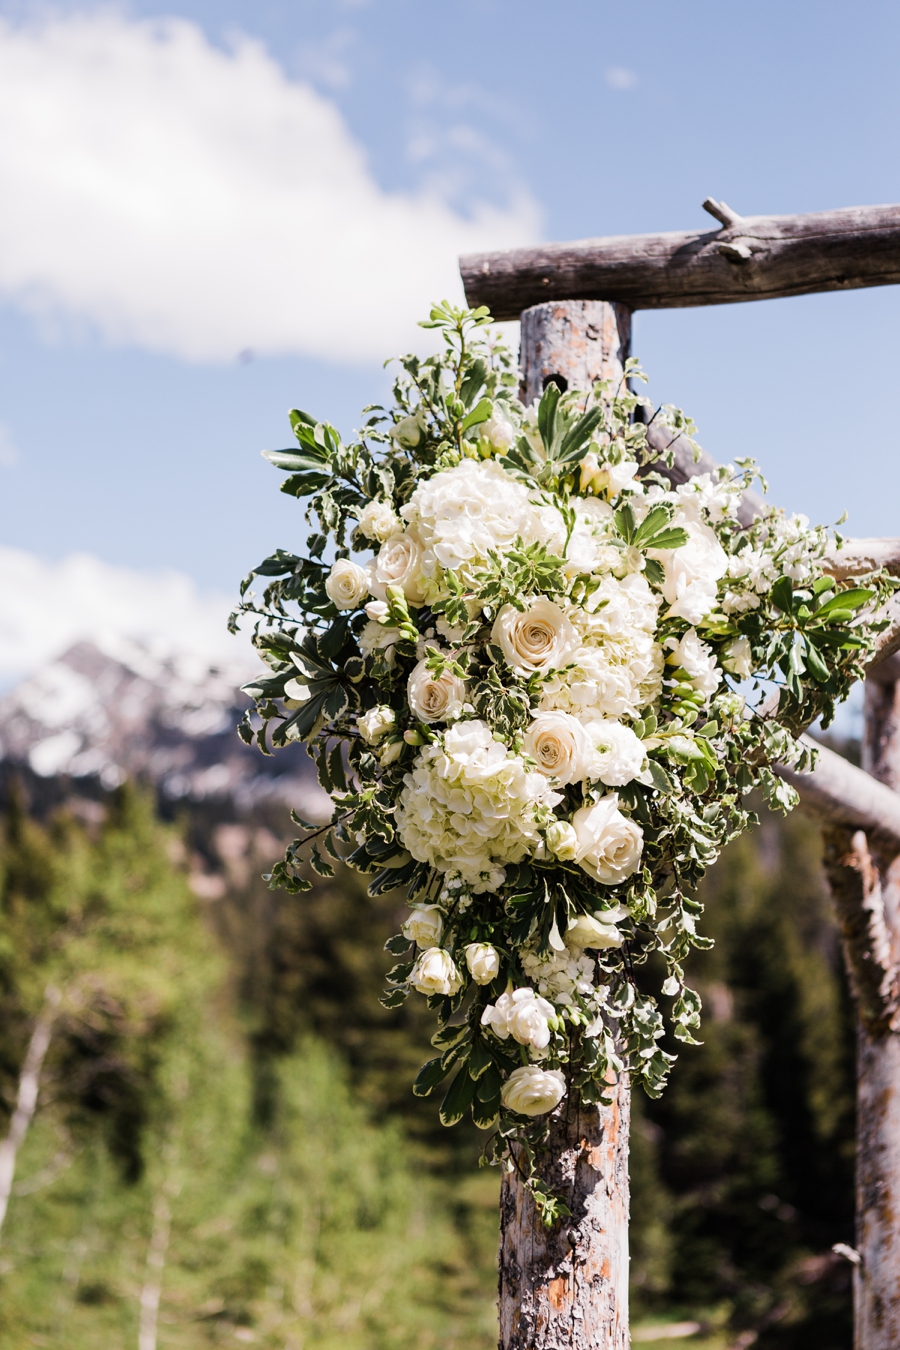 A wedding arbor decorated with white ranunculus and roses by Cottage Creations for a wedding at Grand Targhee